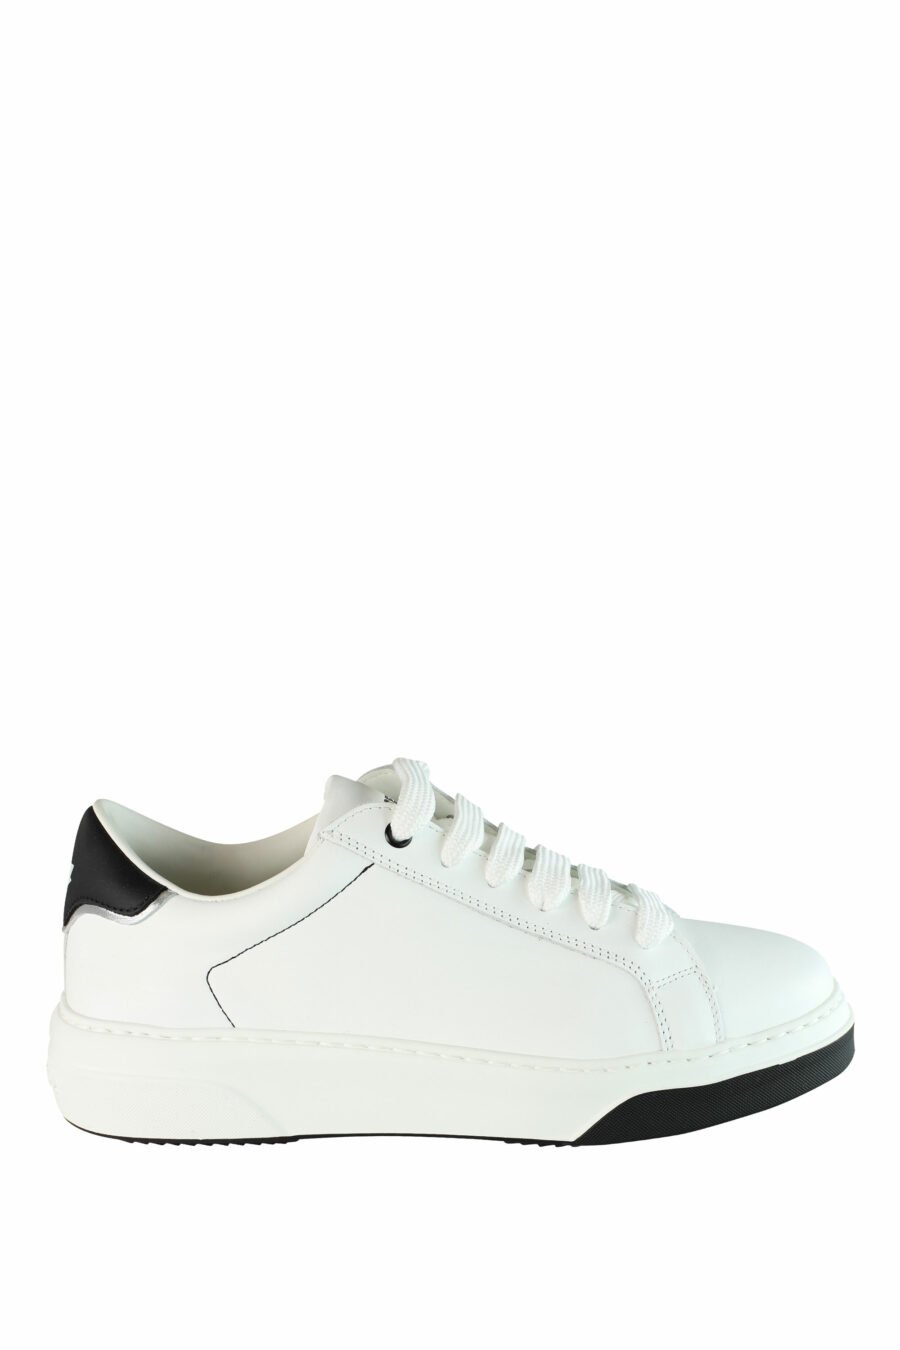 White "bumper" trainers with black details and logo - IMG 1425